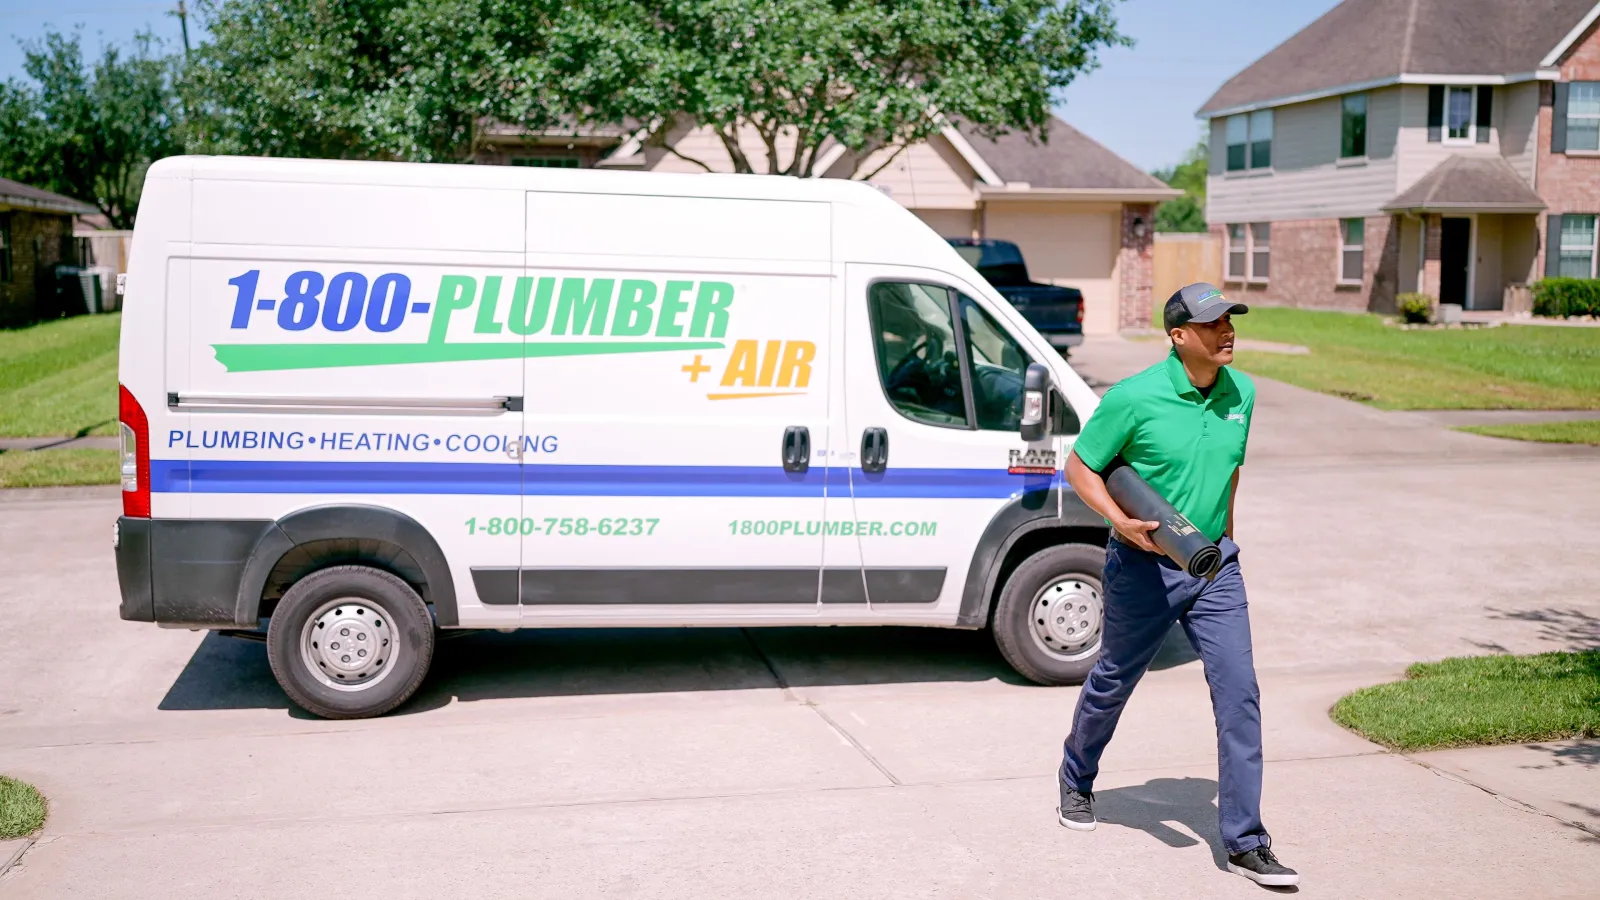 A plumber and a van in Indianapolis Indiana